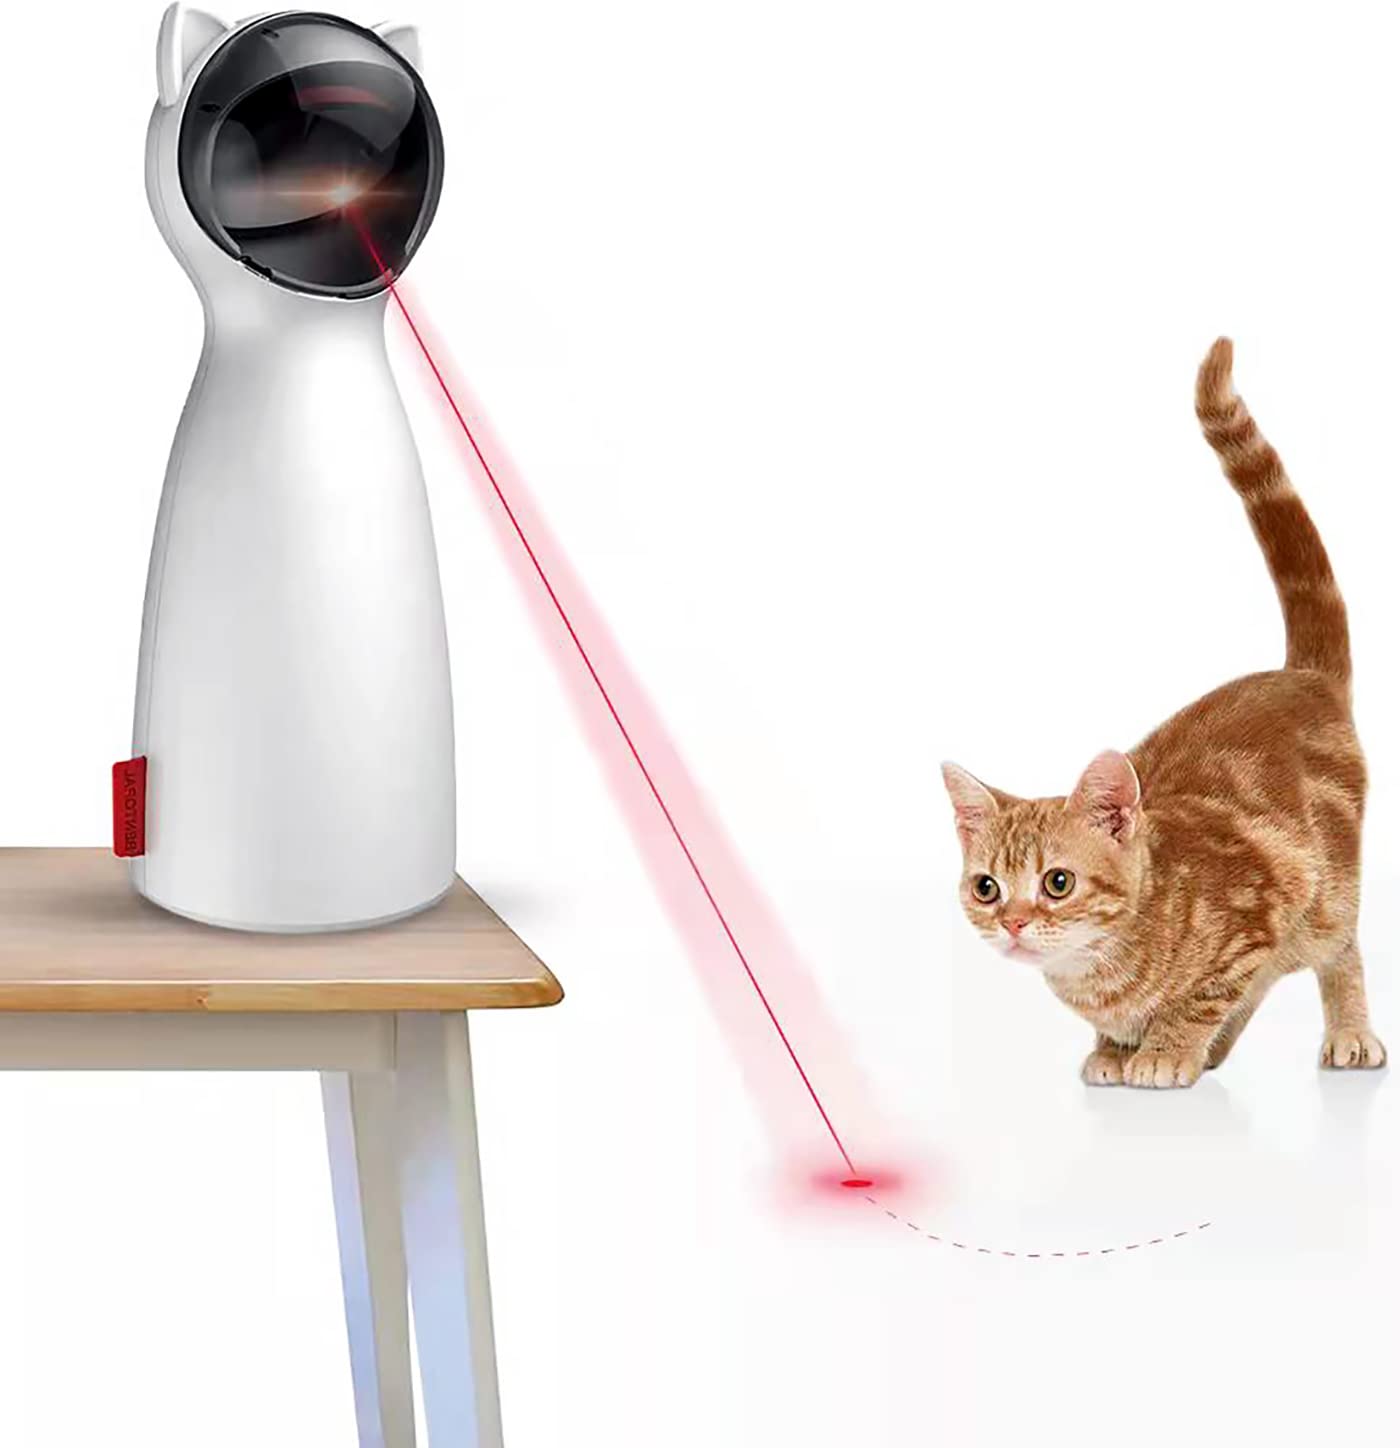 PetDroid Automatic Cat Laser Toy  - $10 at Amazon